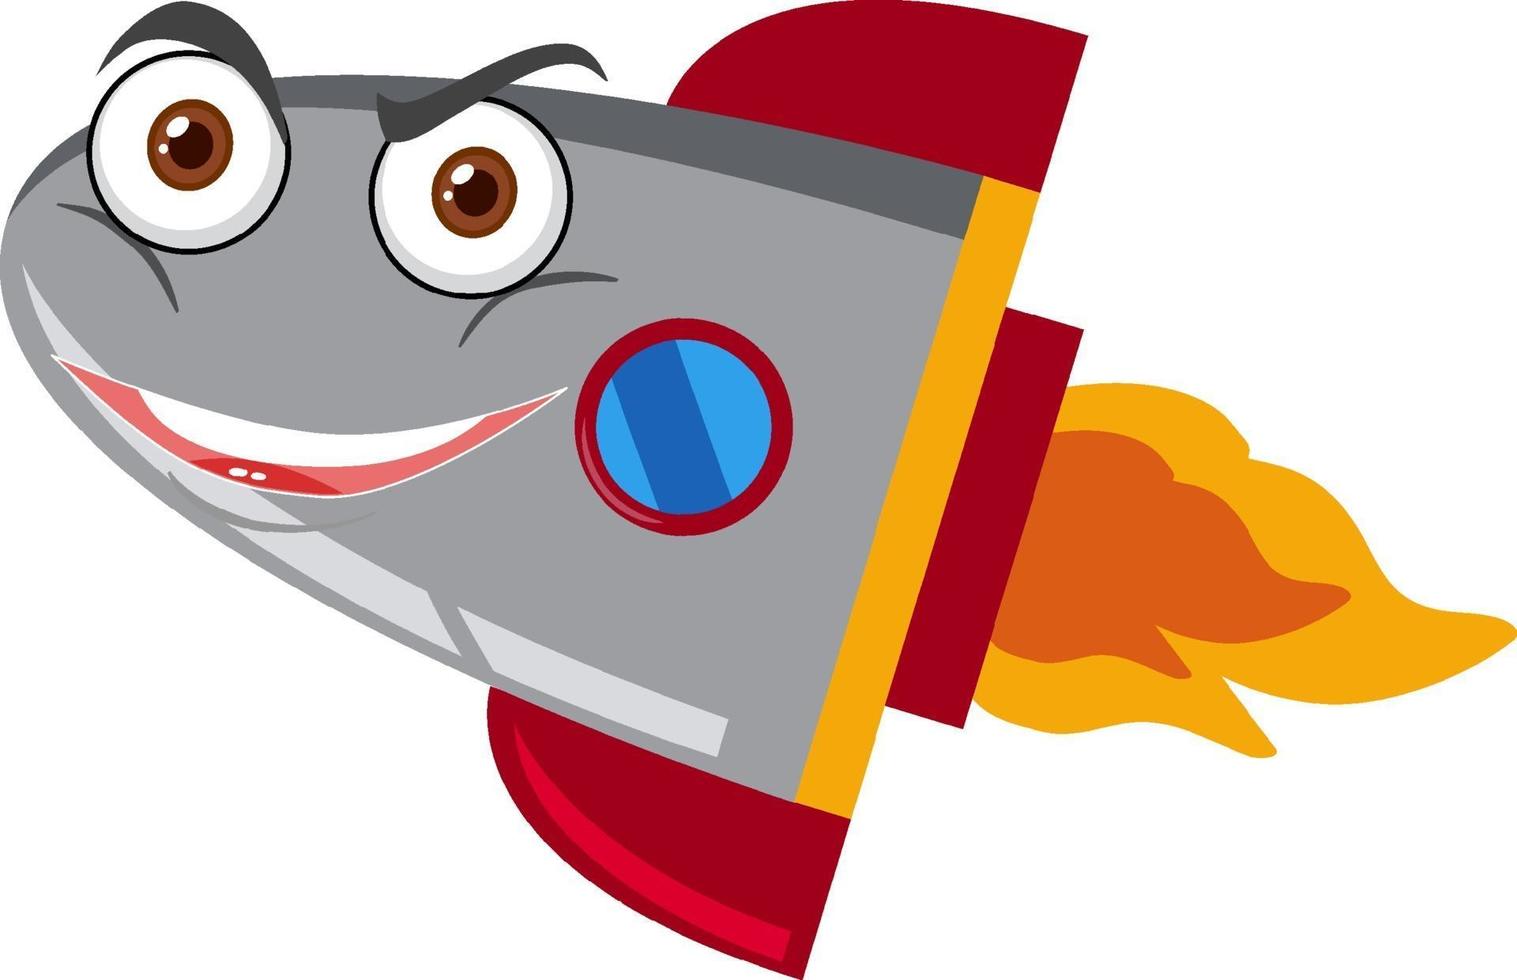 Rocketship cartoon with happy face on white background vector